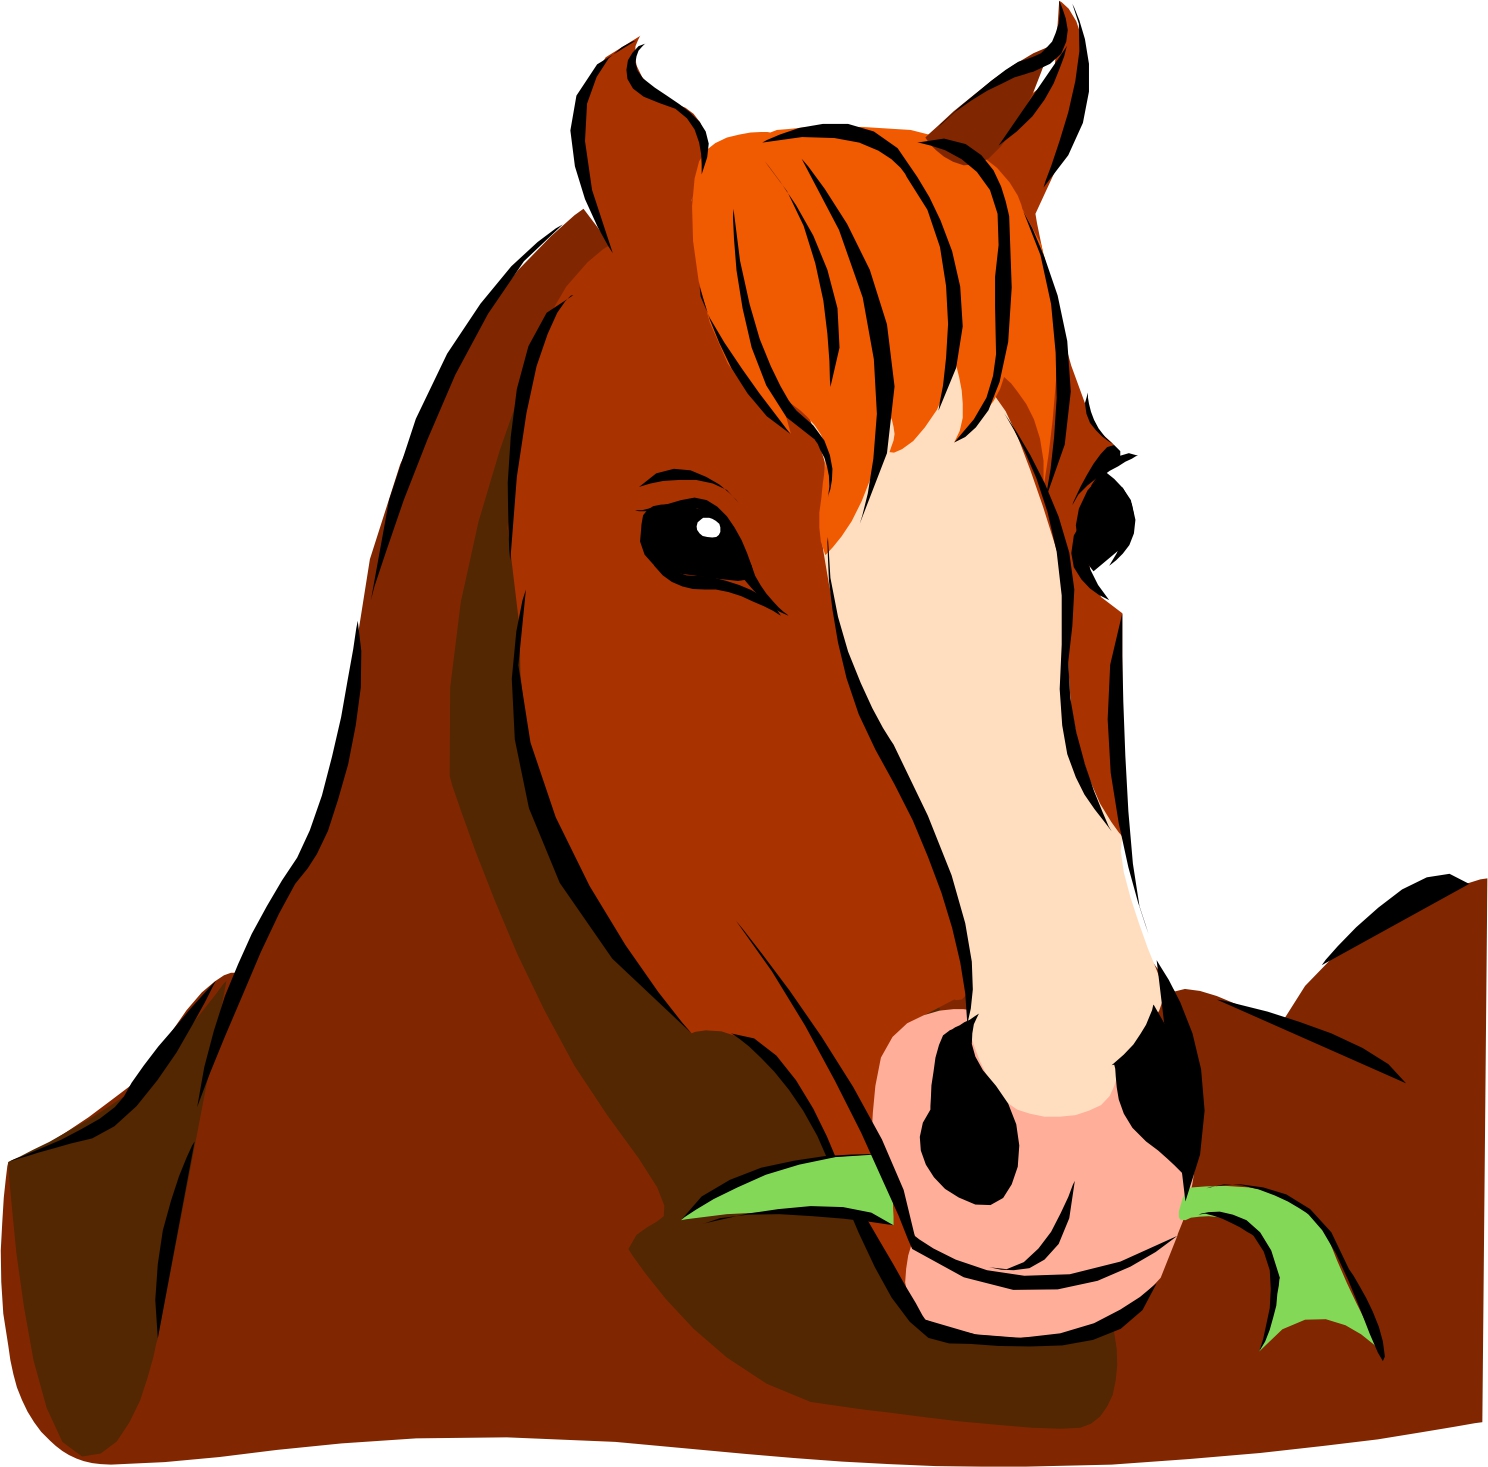 Cartoon Horse | Page 3 - Clipart library - Clipart library